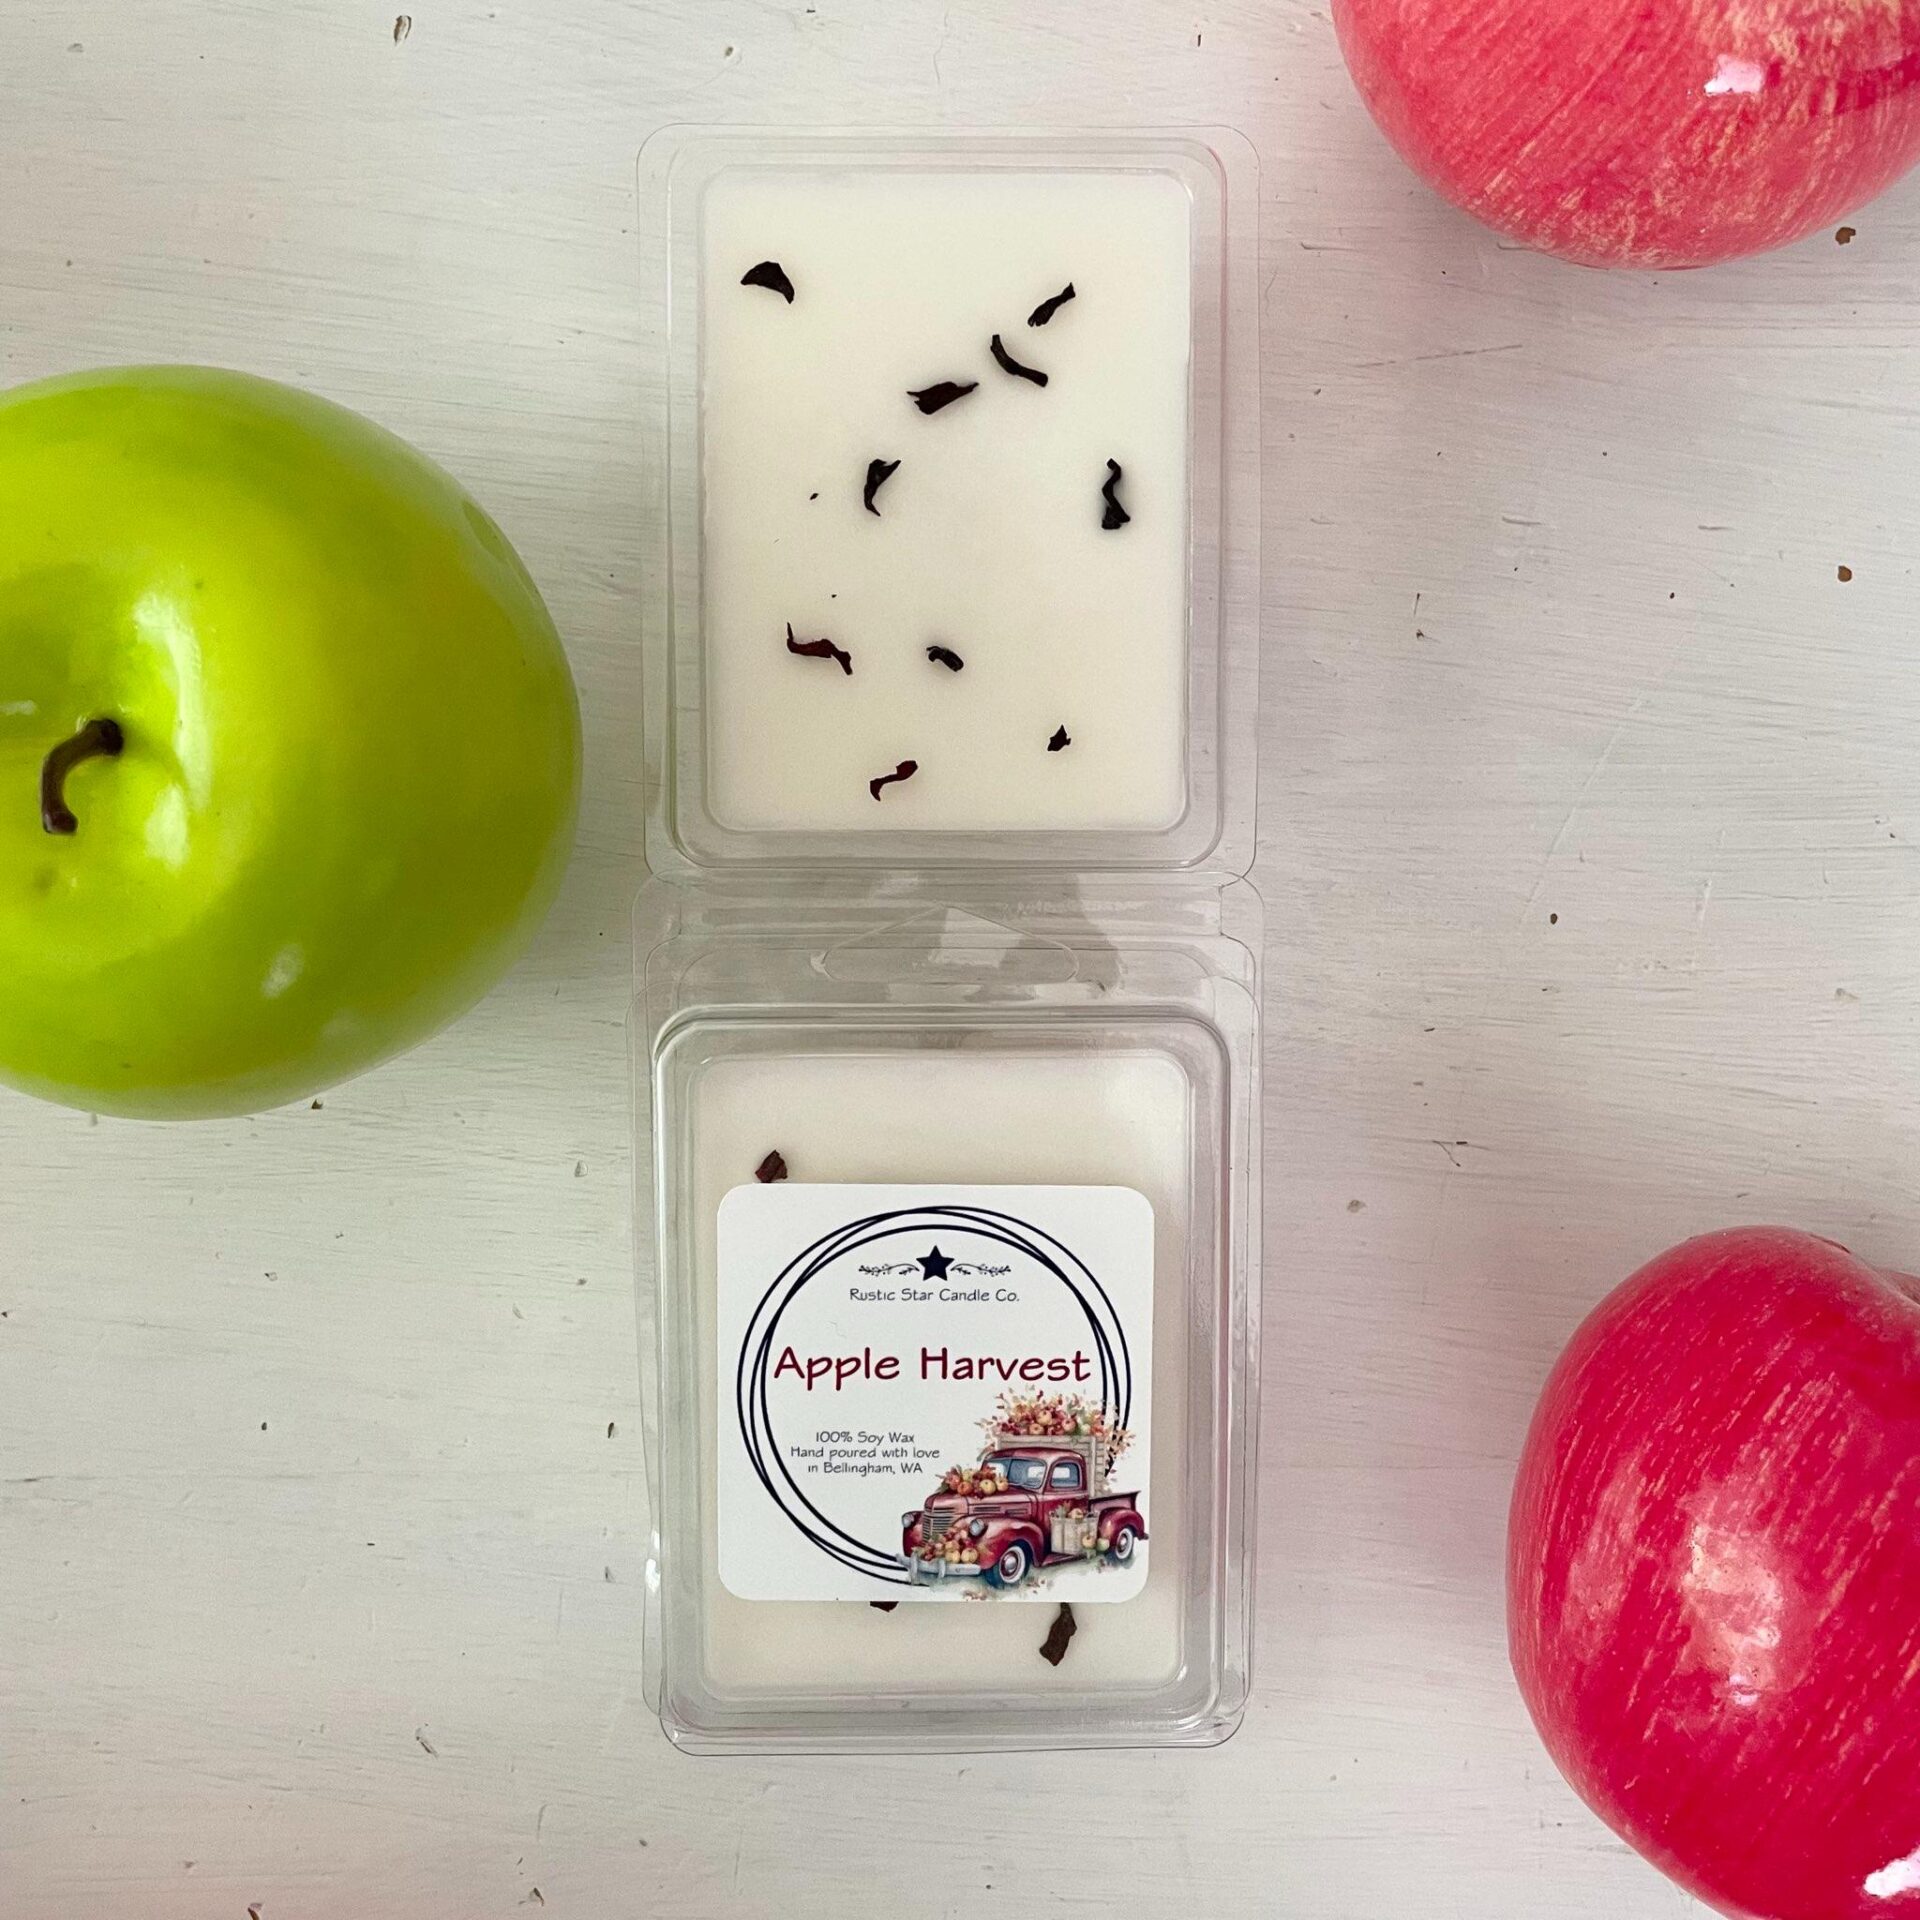 Apple Wax Melts Variety Pack - Apple Harvest, Caramel Apple, Apple Afternoon - Highly Scented + Natural Oils - Shortie's Candle Company, Size: 9 oz.